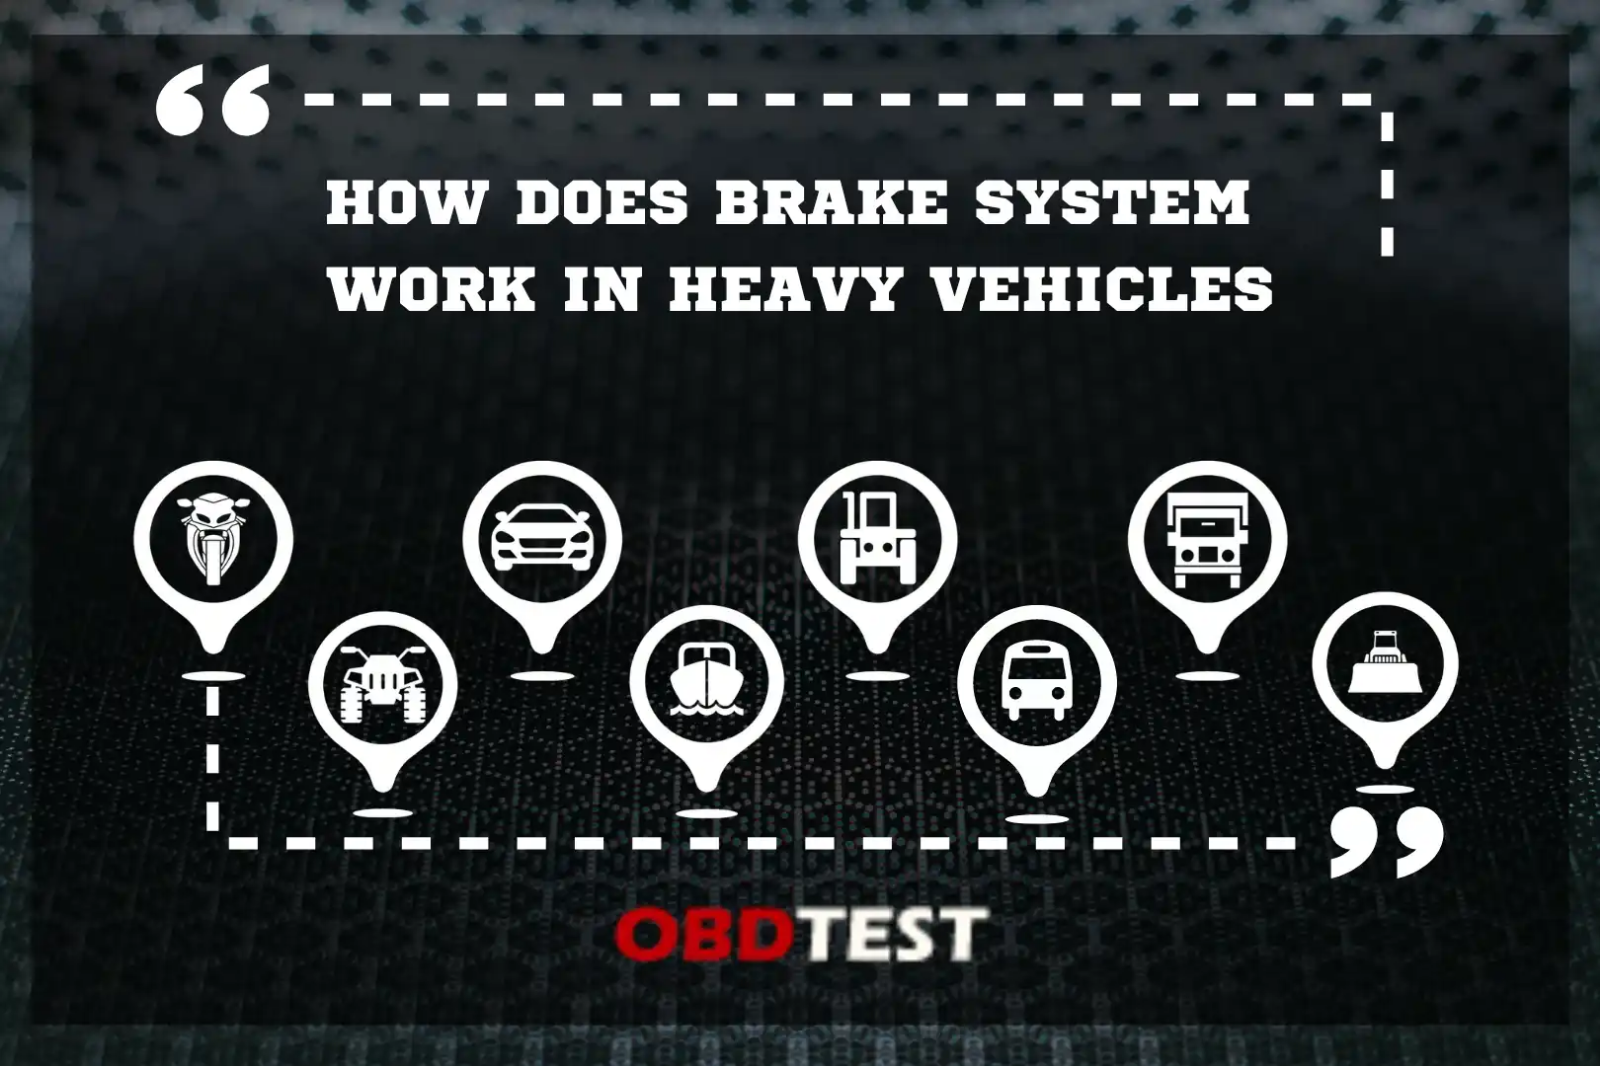 How does brake system work in heavy vehicles?